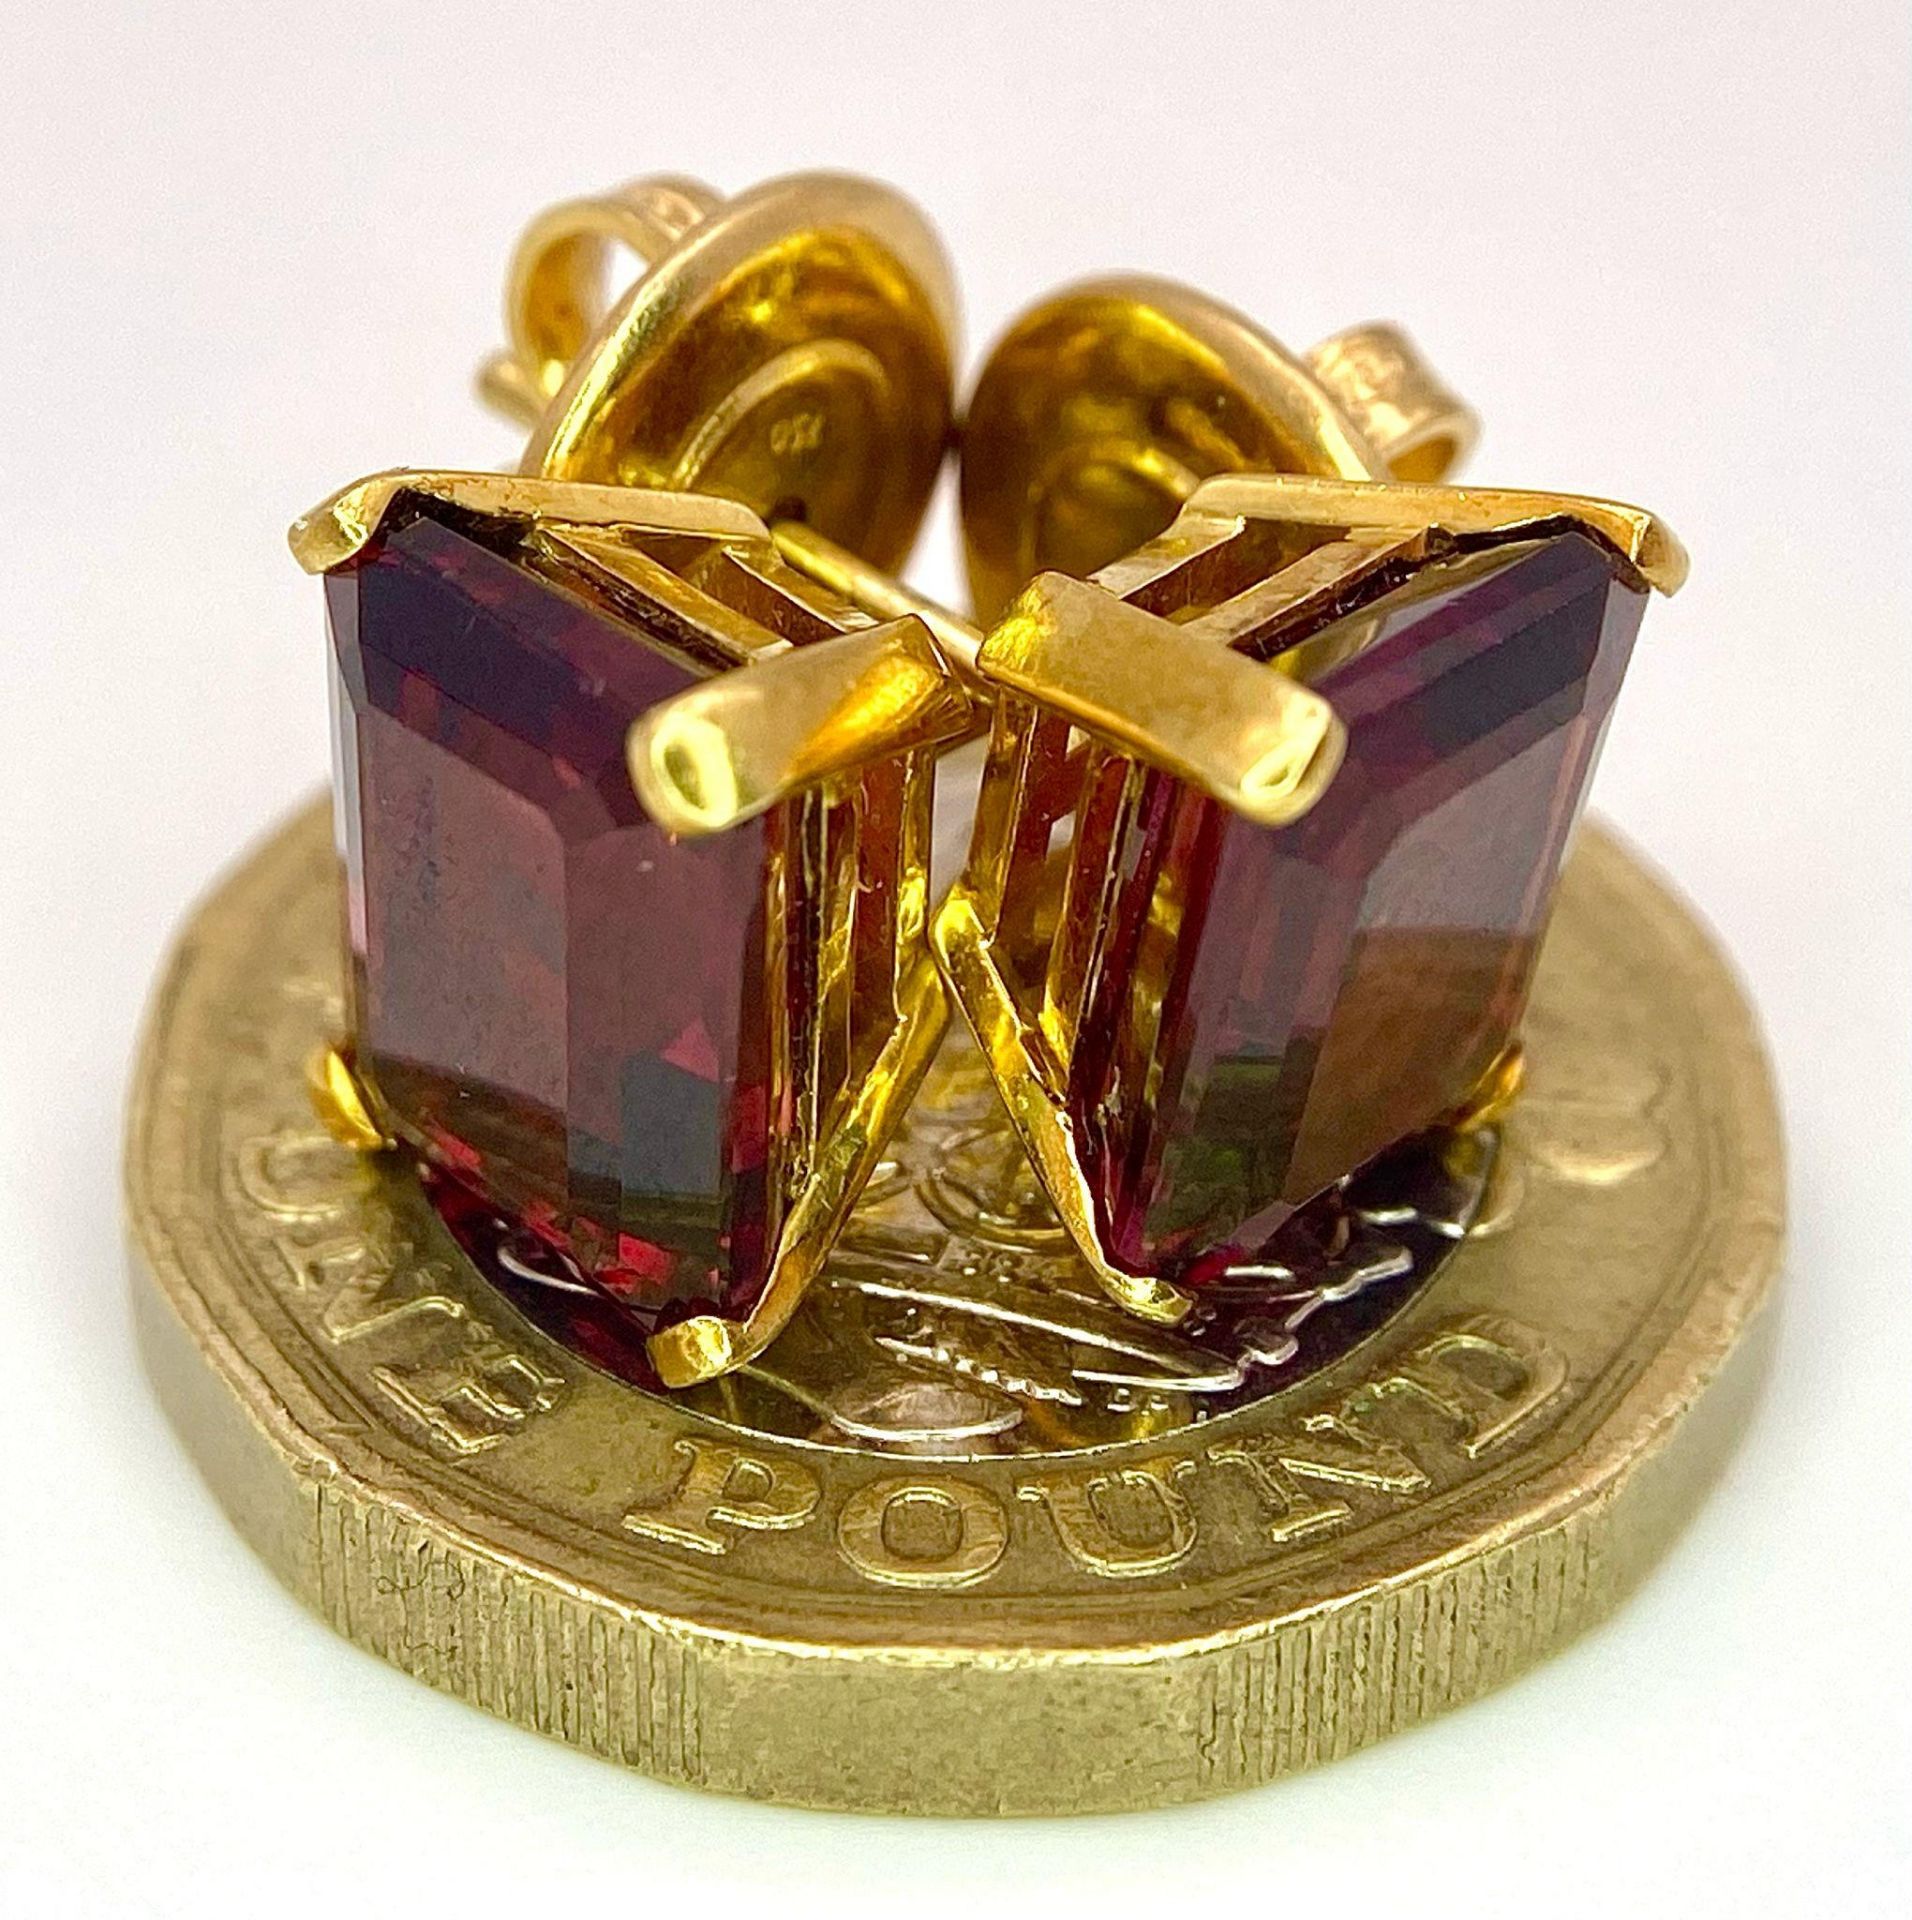 A Pair of 18K Yellow Gold and Alexandrite Earrings. Emerald cut alexandrite - 5ctw. 5.7g total - Image 5 of 8